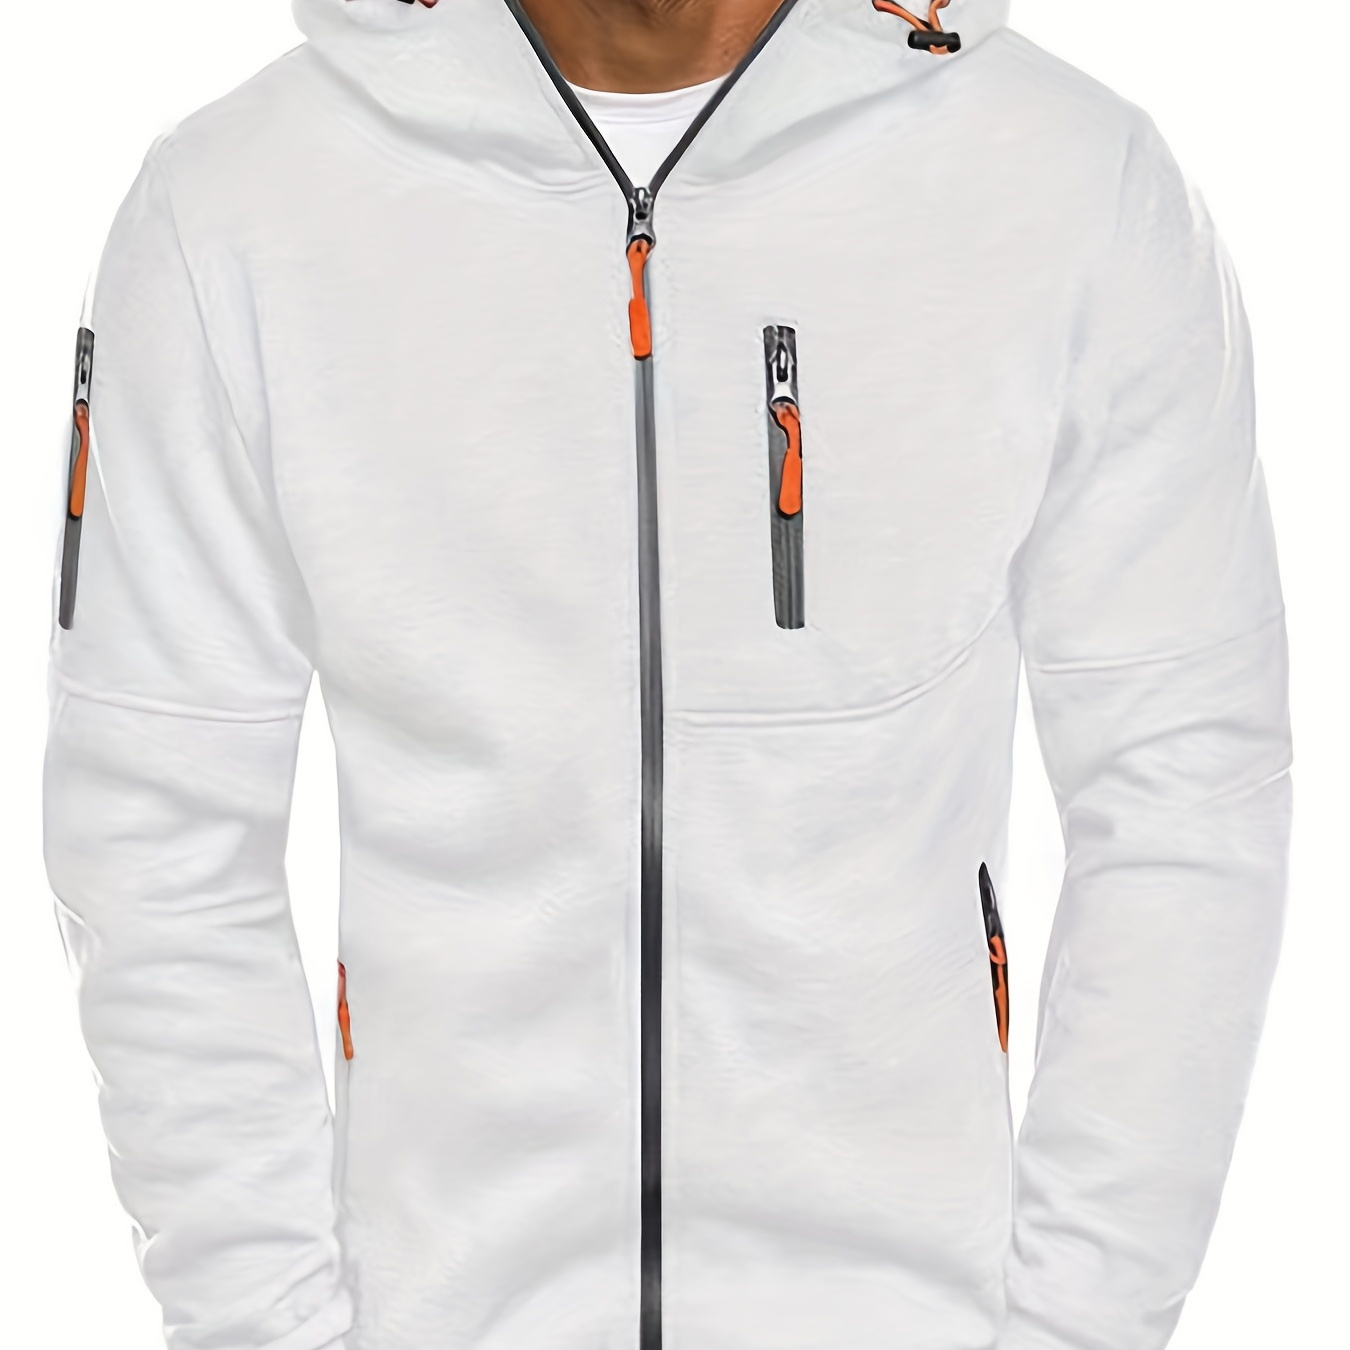 

Men's Solid Hooded Long Sleeve And Zipper Down Sweatshirt Jacket With Multiple Zippered Pockets, Versatile And Chic Hoodie Jacket For Spring And Autumn Outdoors Activities